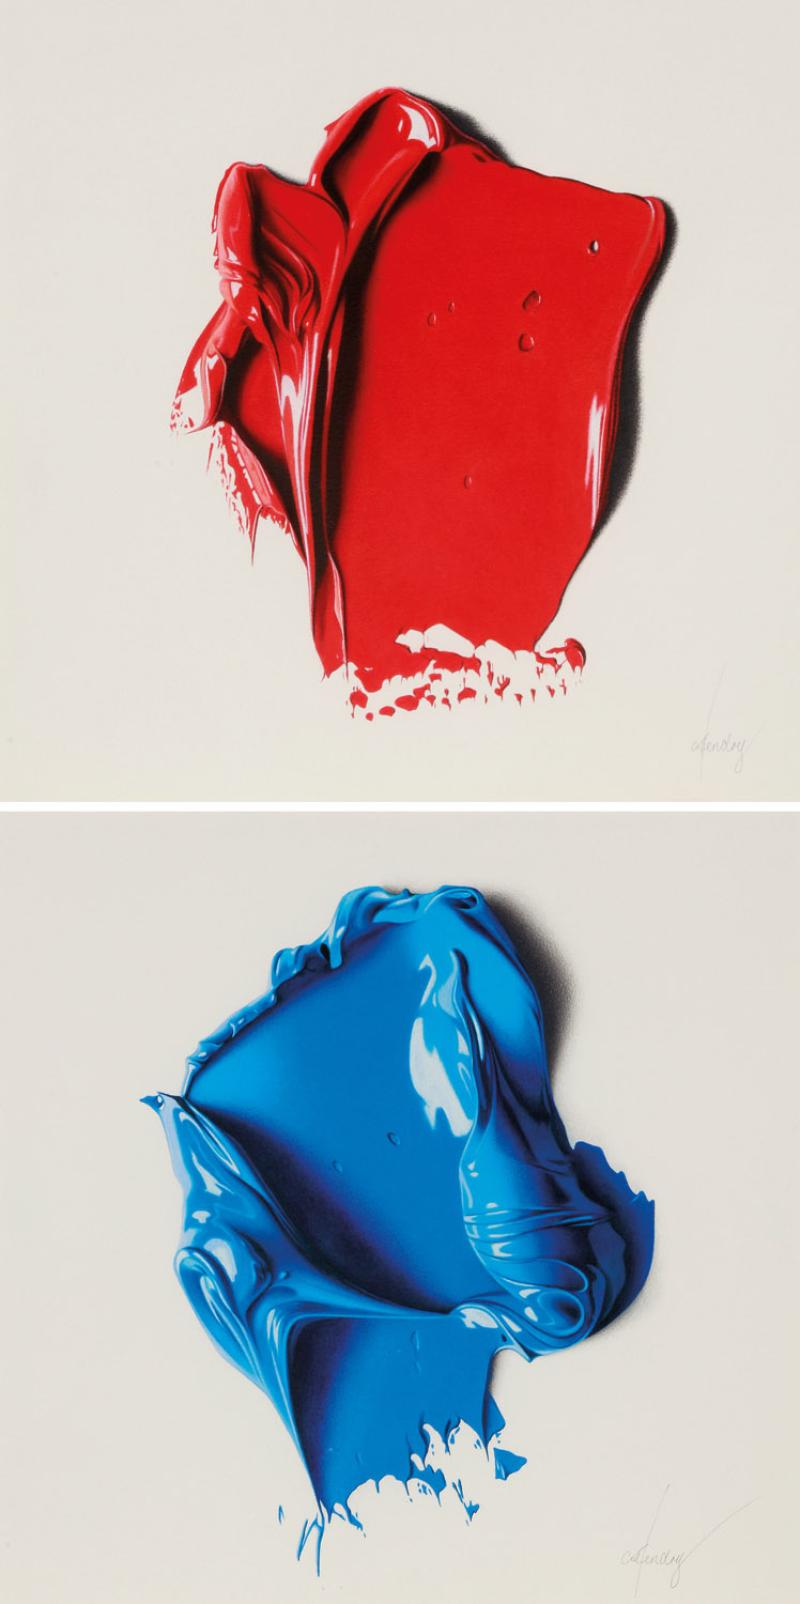 Cj Hendry - (i) Red Paint Swatch (Small); (ii) Blue Paint Swatch (Small)